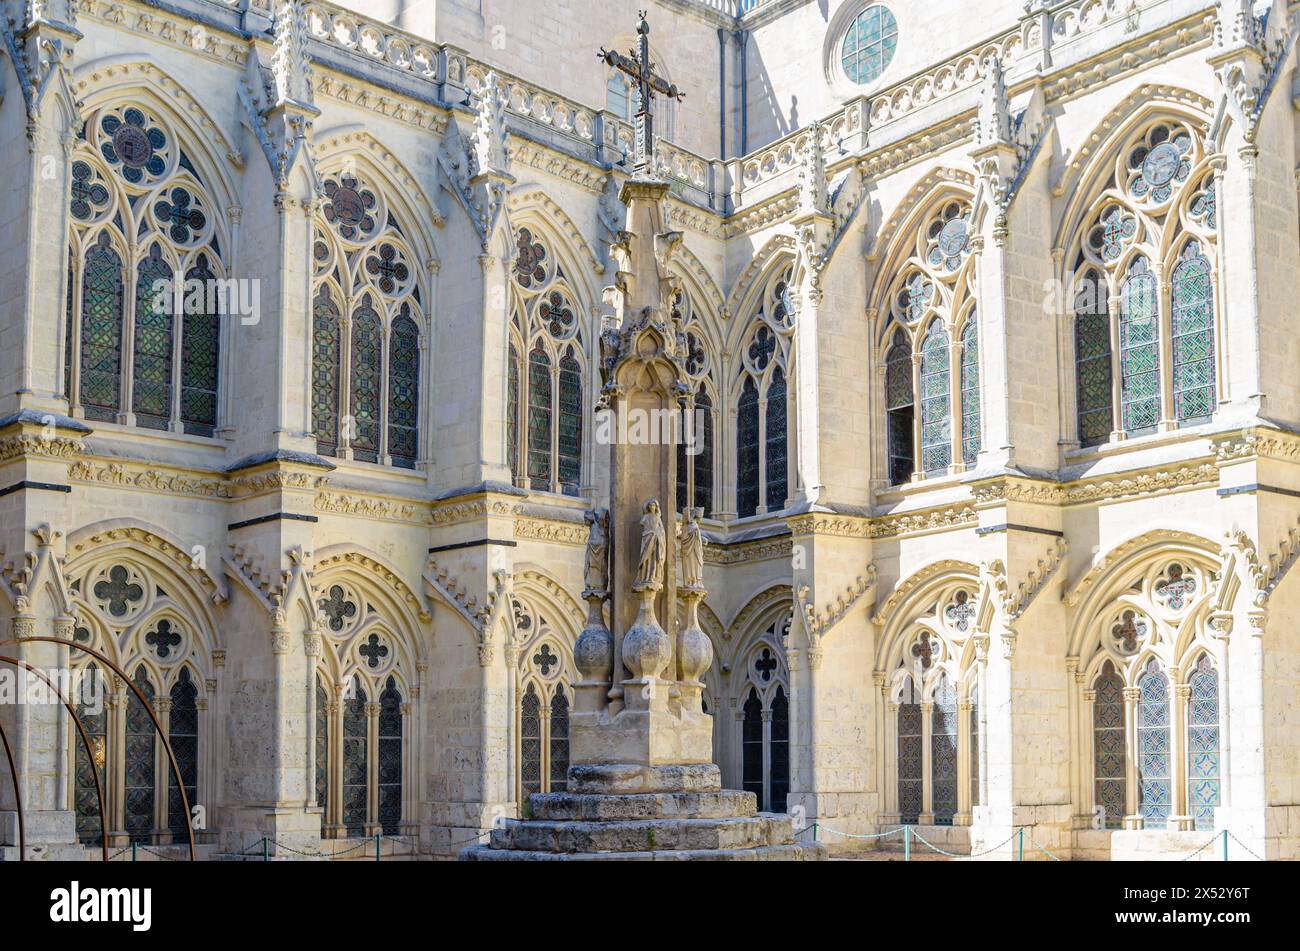 BURGOS, SPAIN - JUNE 8, 2014: Cloister of the Gothic cathedral of Burgos, Castile and Leon, Spain Stock Photo